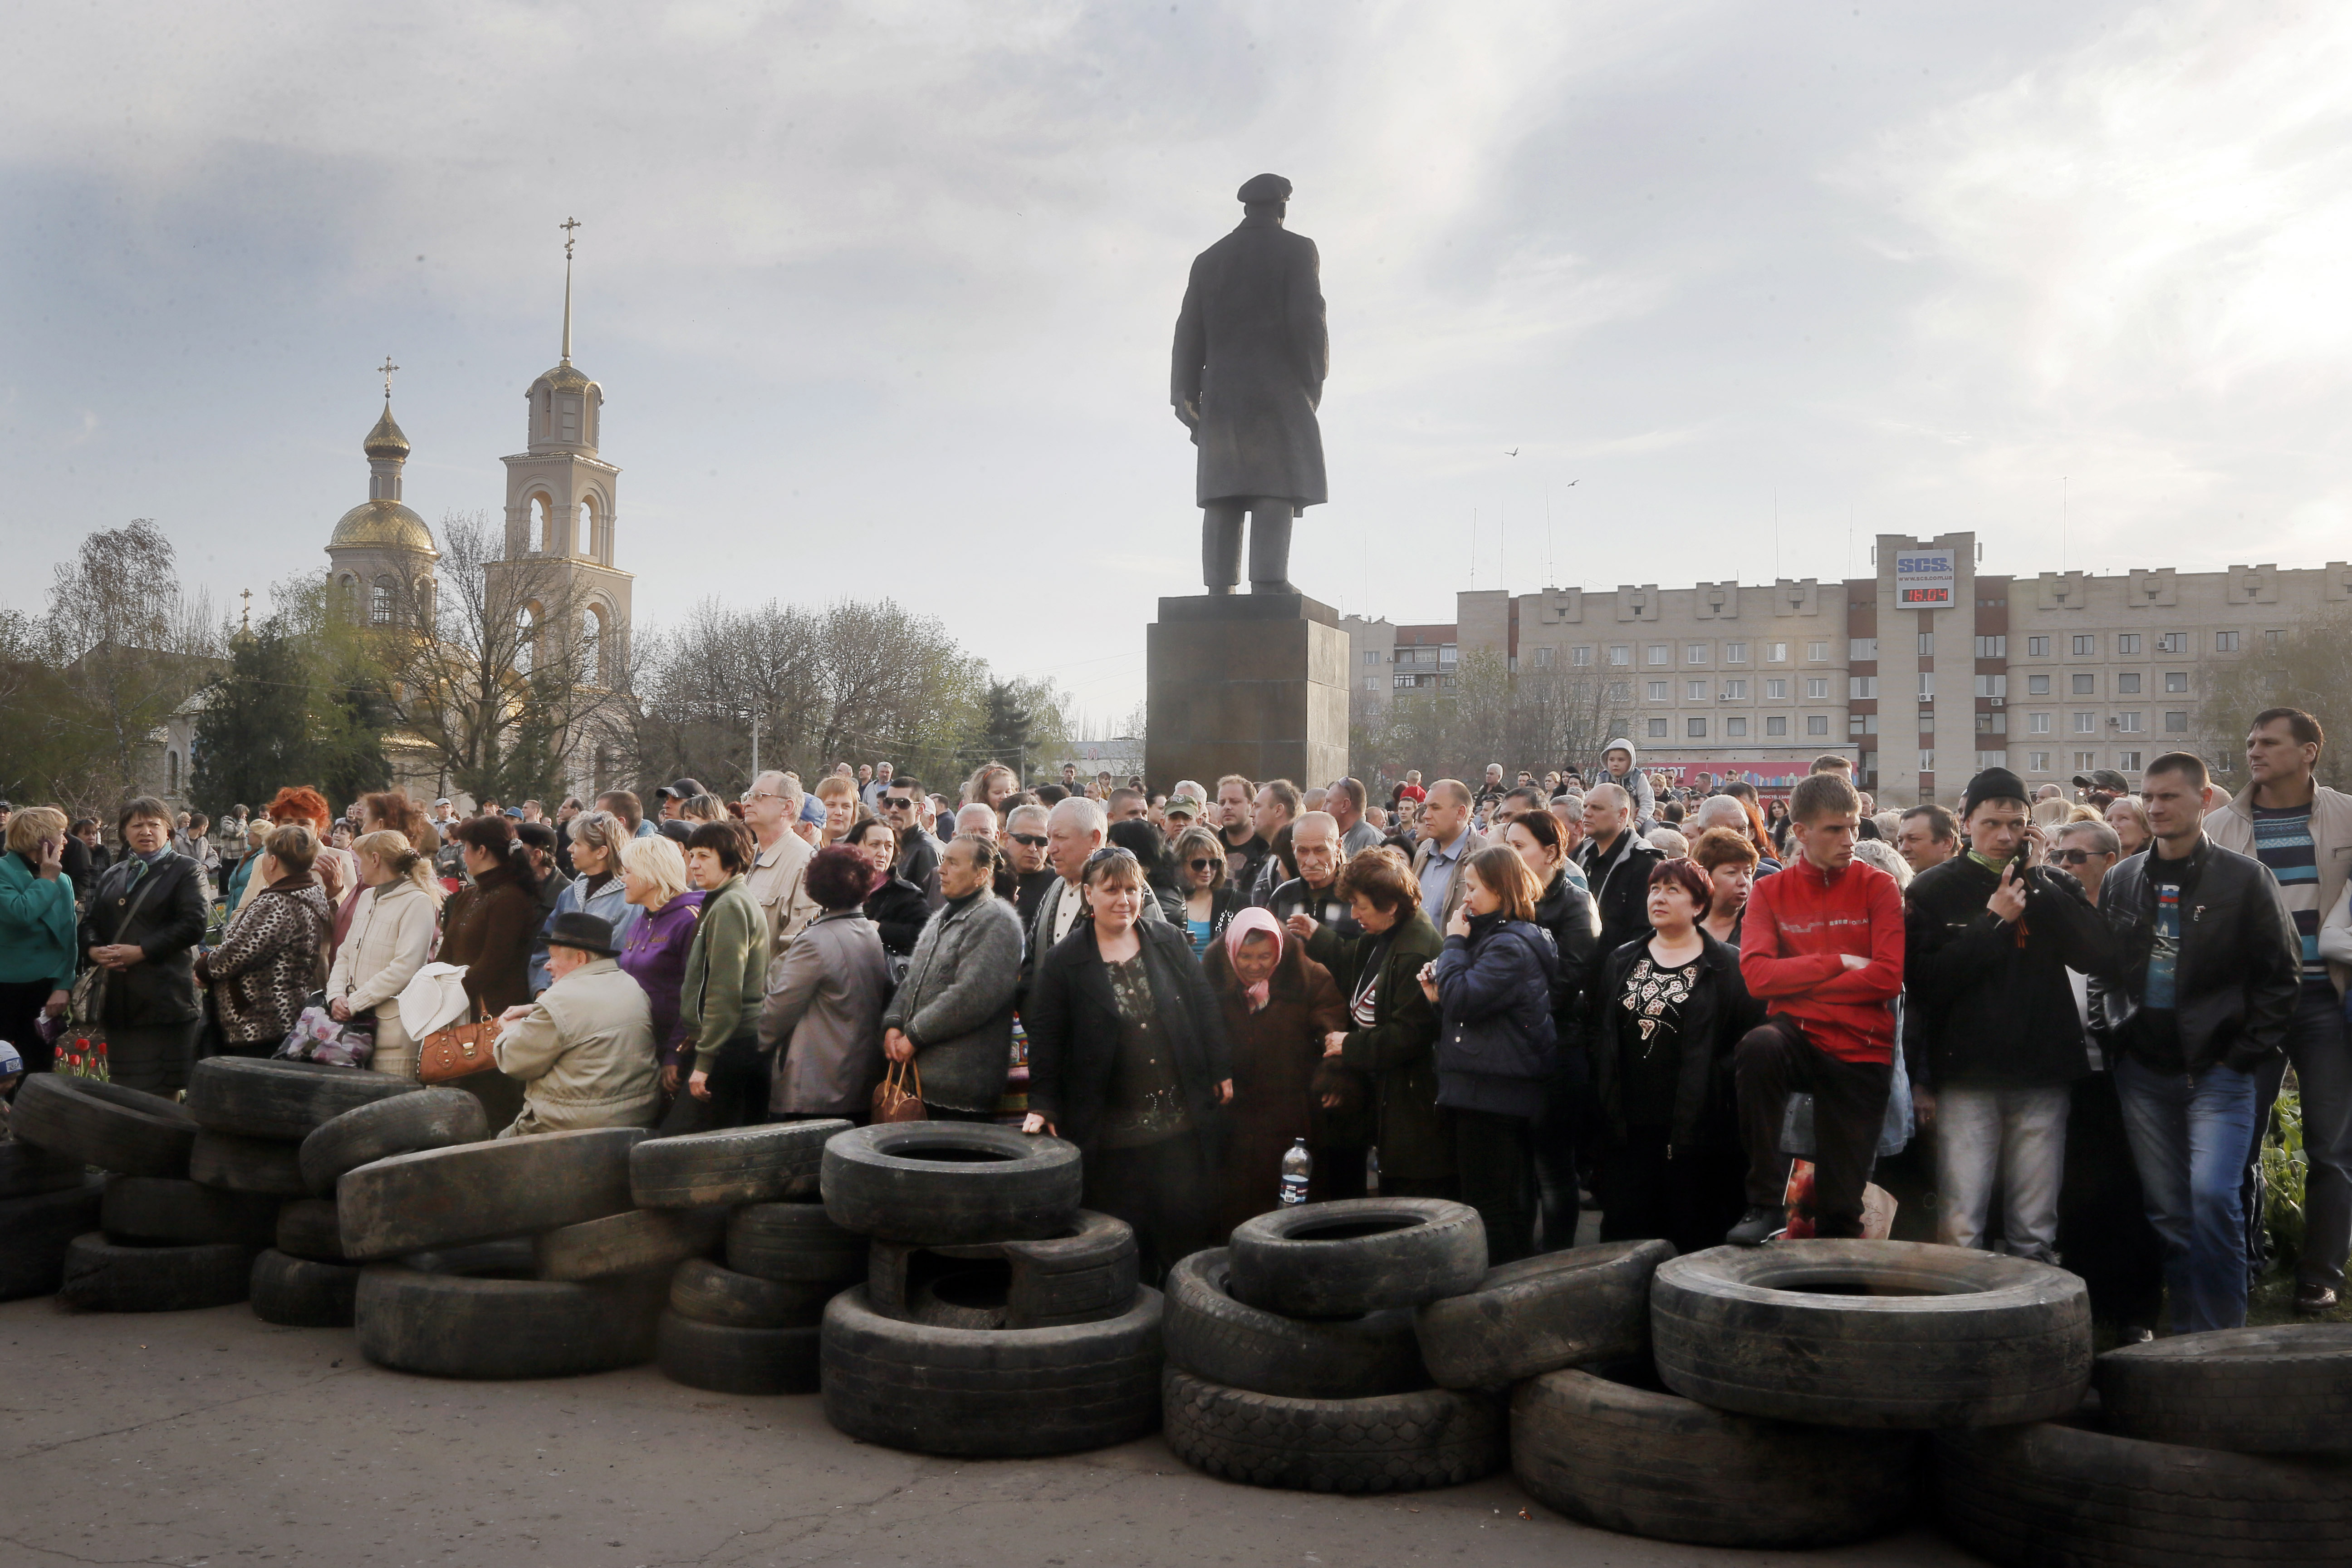 Protesters attend a pro-Russian rally next to a statue of Soviet revolutionary leader Vladimir Lenin in the centre of Slovyansk in eastern Ukraine on Friday. Photo: AP